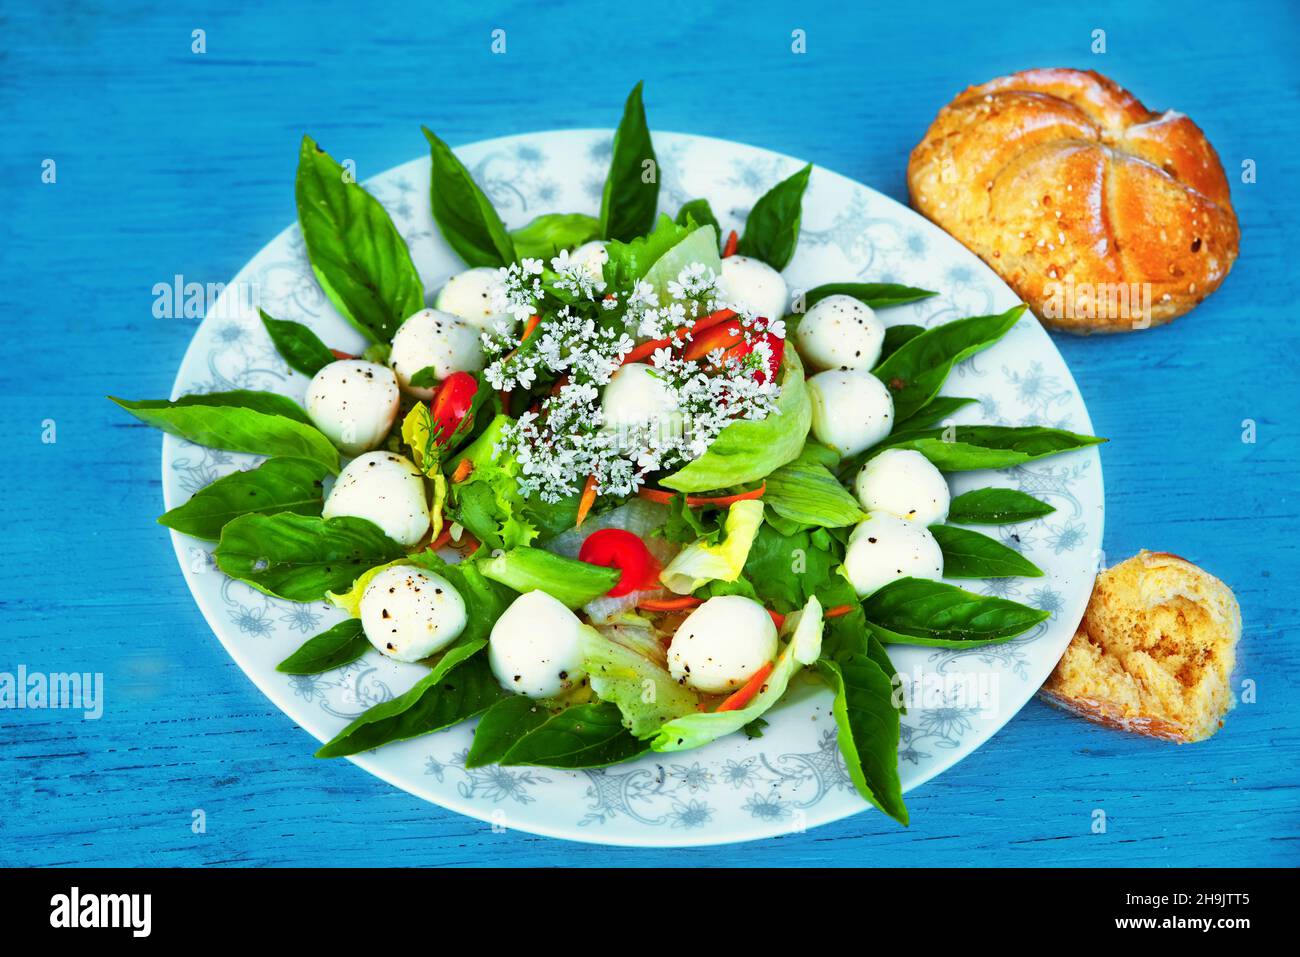 Plate with salad arranged in circle decorated with white tiny flower on blue wooden table. Mini mozarella ball, green basil leaf, olive oil and red pe Stock Photo